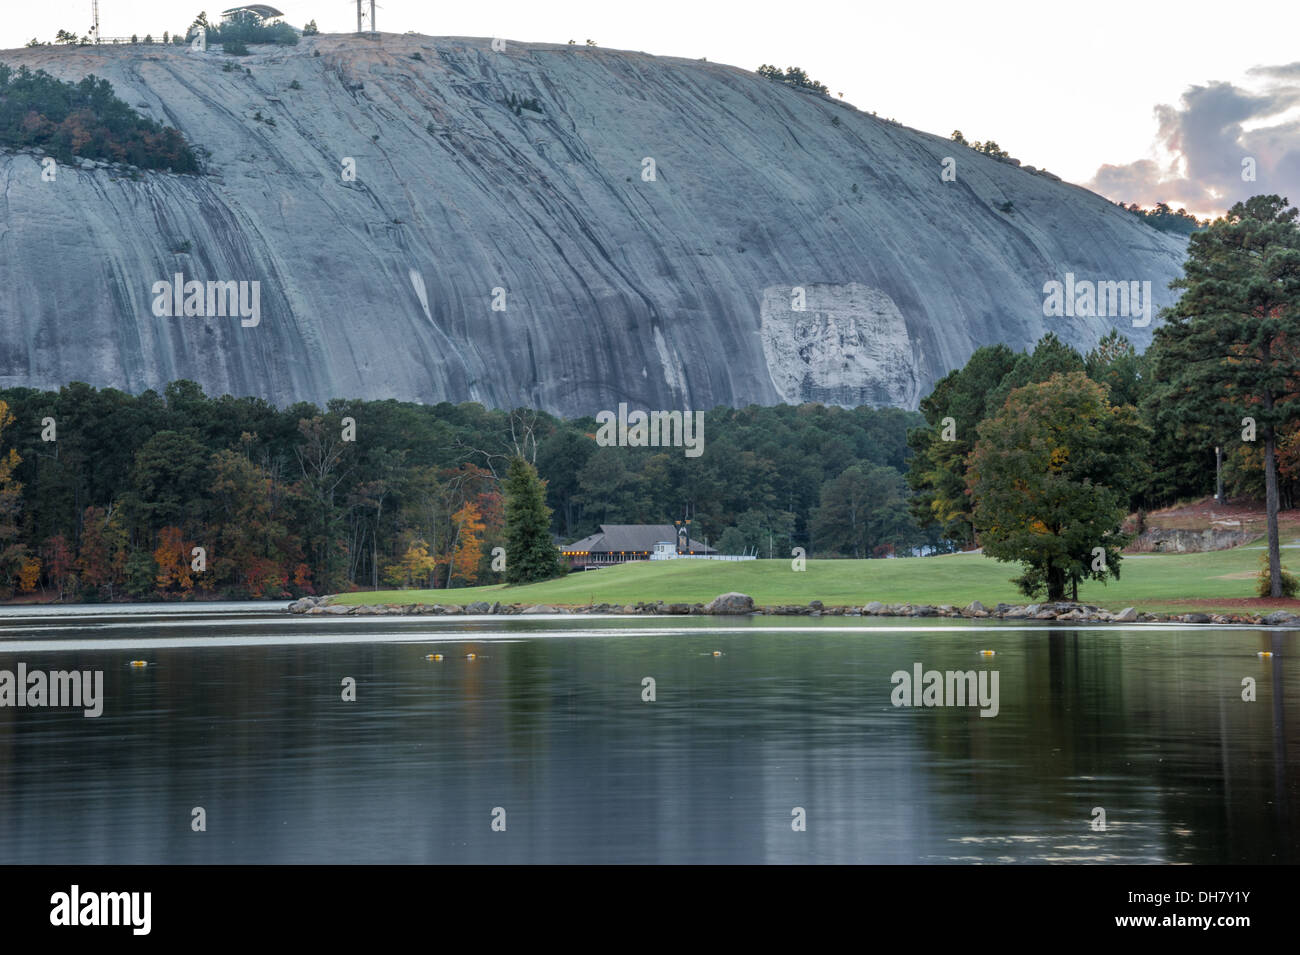 Autumn lake view at dusk of Stone Mountain Park with Confederate Memorial Carving, golf course, riverboat, and Summit Skyride. (USA) Stock Photo